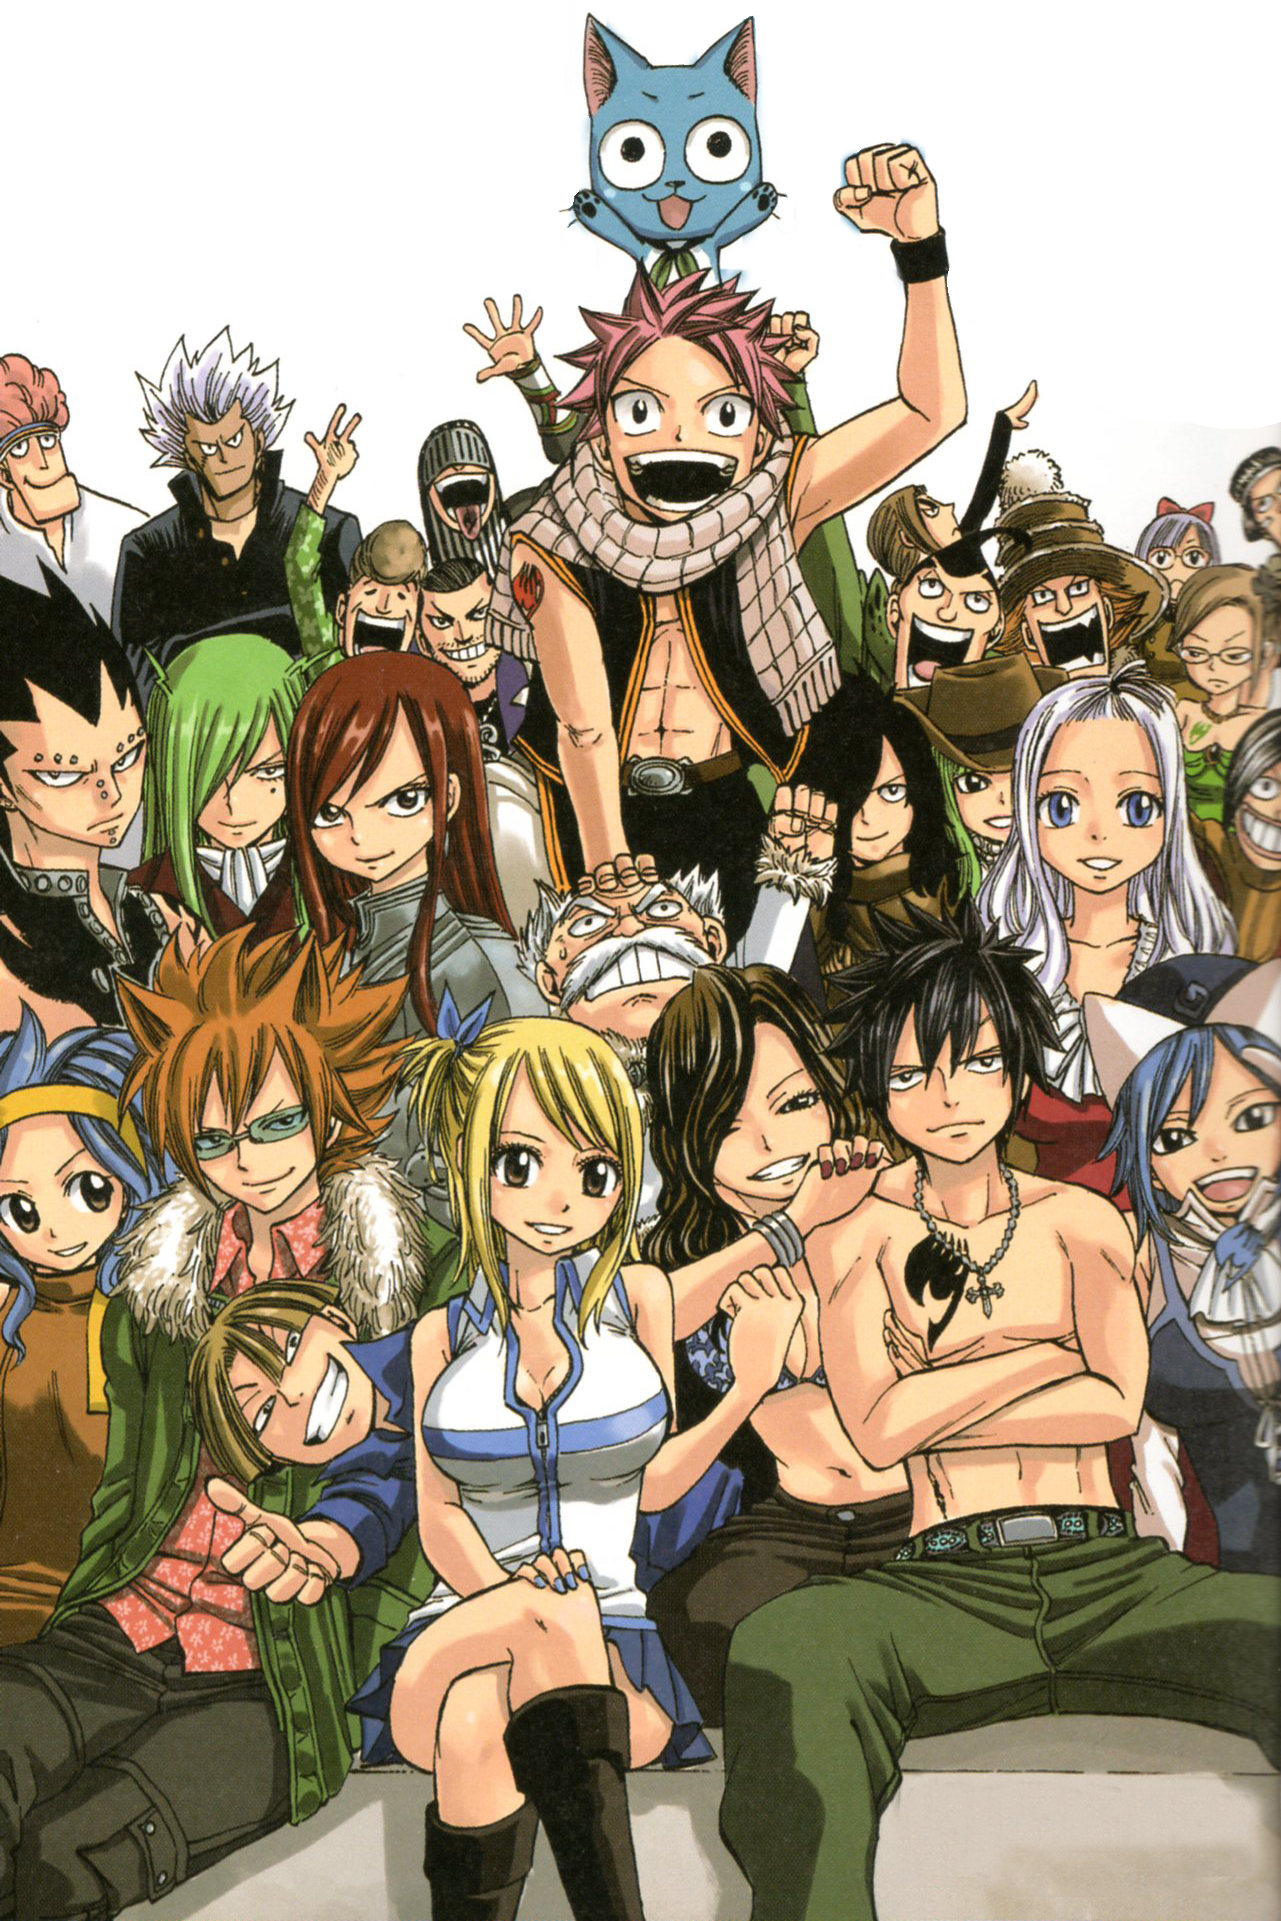 fairy tail episodes online free